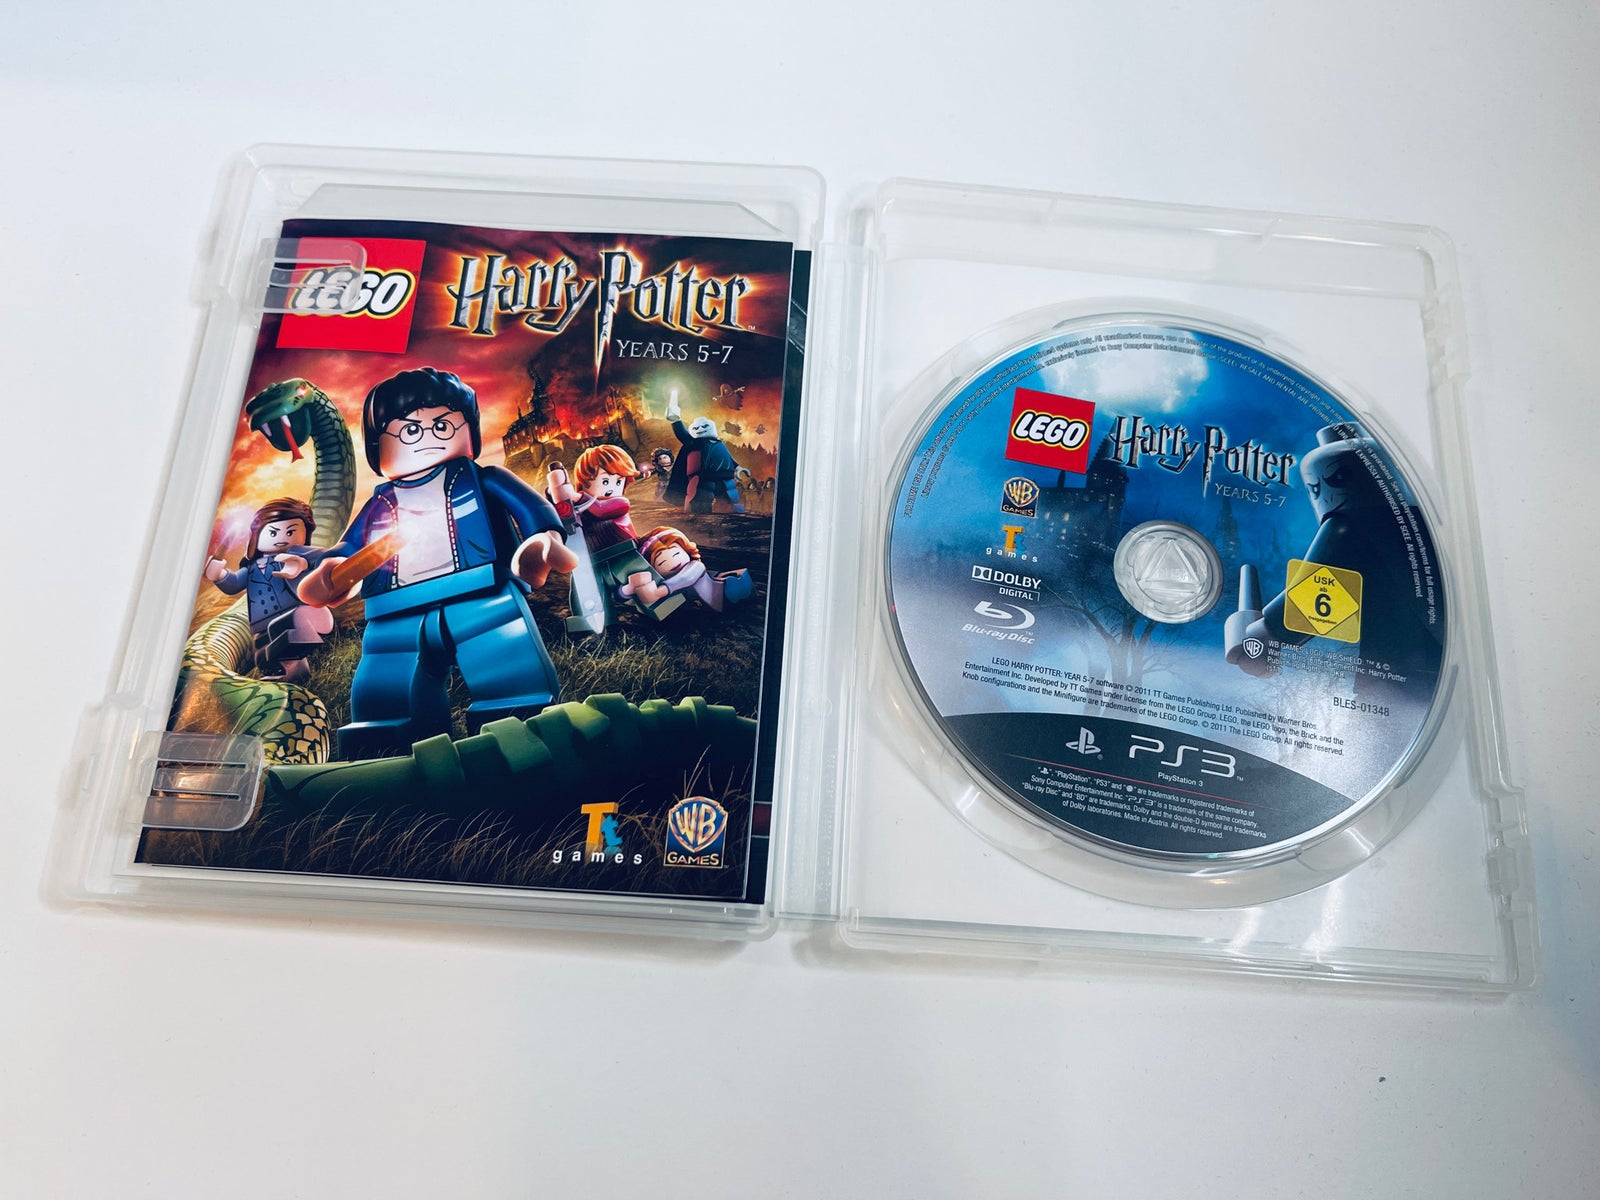 LEGO Harry Potter Years 5 - 7, Playstation 3, PS3